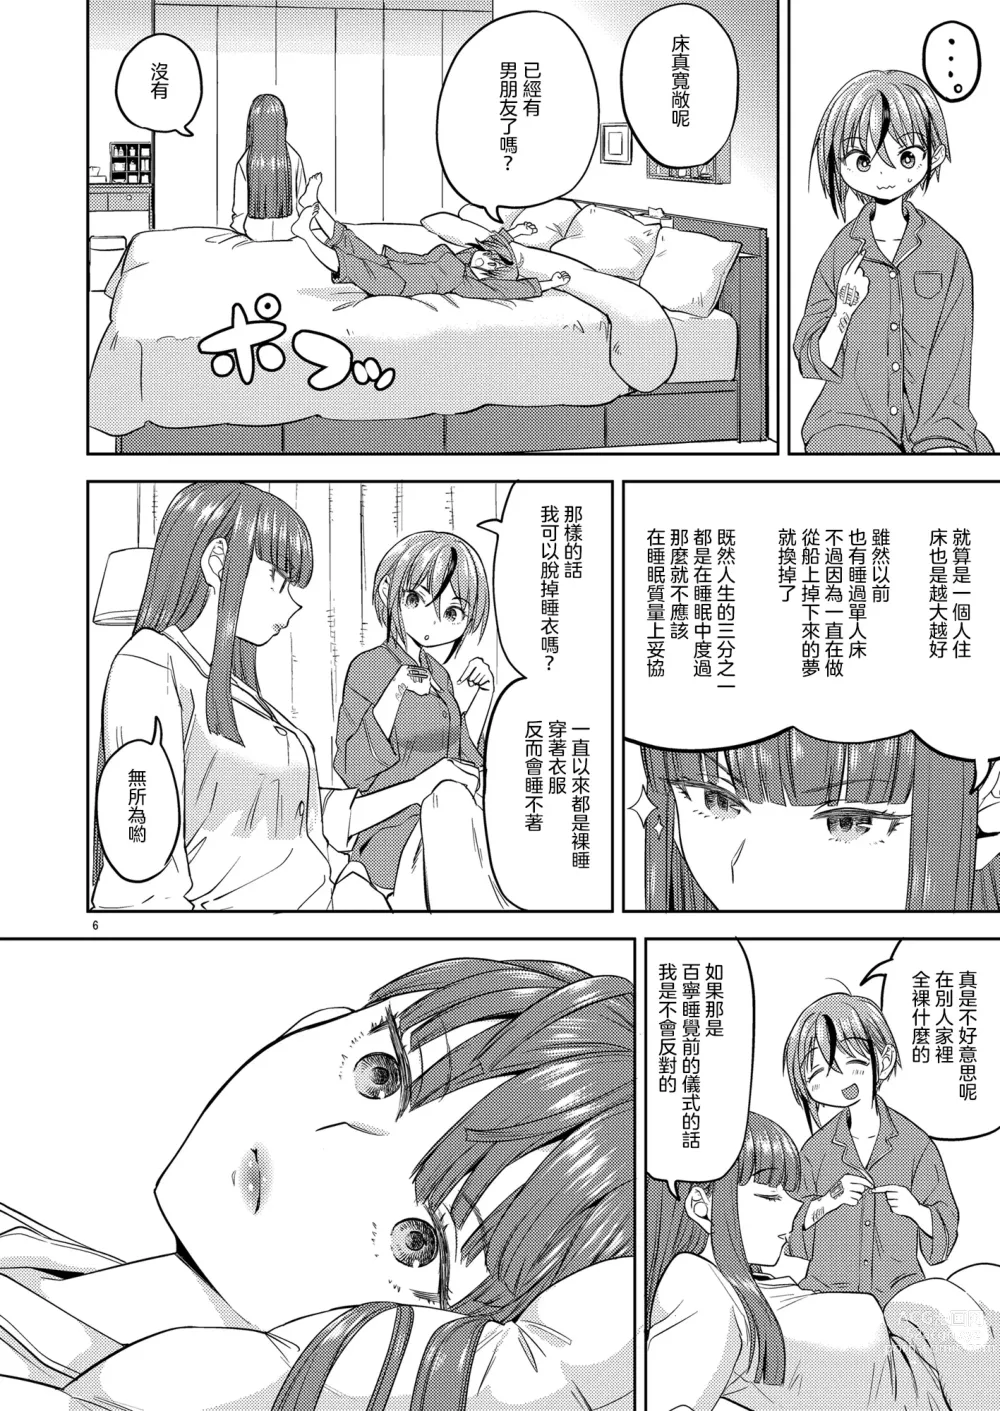 Page 8 of doujinshi 當我們全裸相擁抱之時